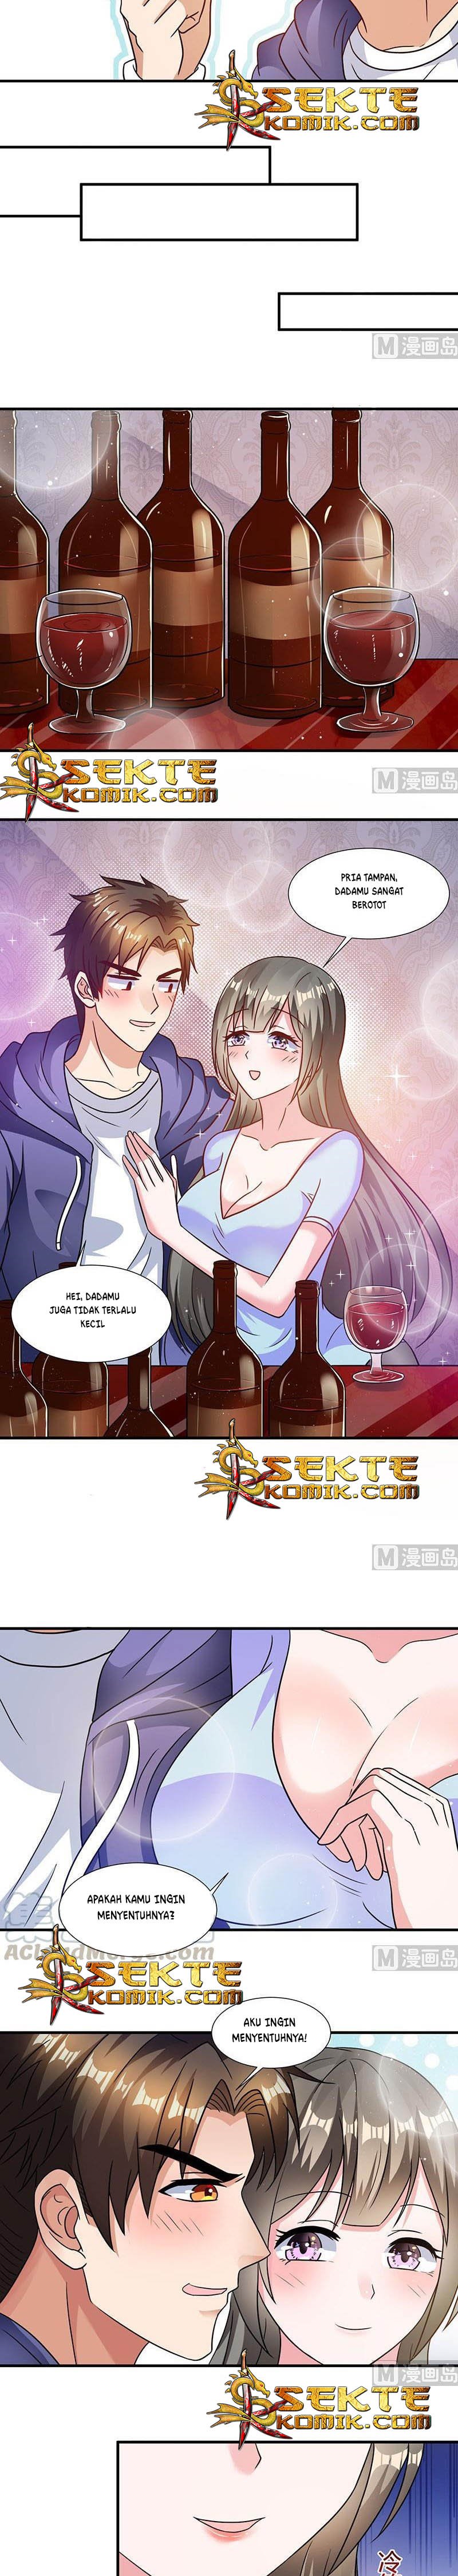 My Beauty Agent Wife Chapter 06